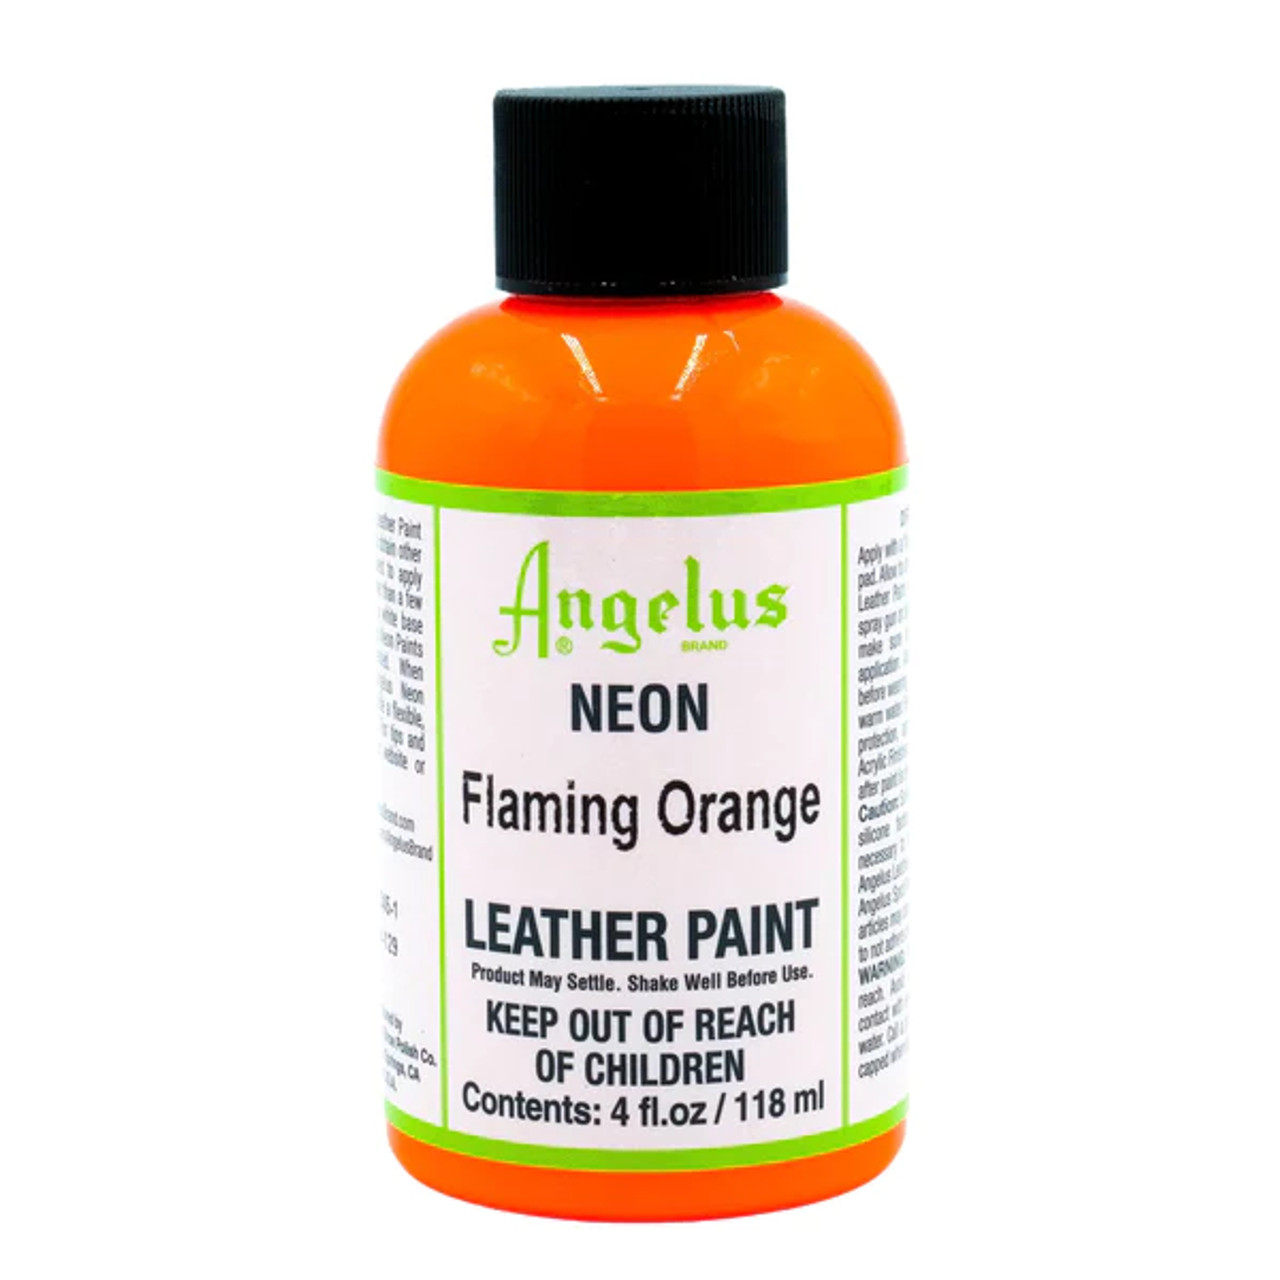 Angelus Leather Paint - Neon Rio Red, 1 oz